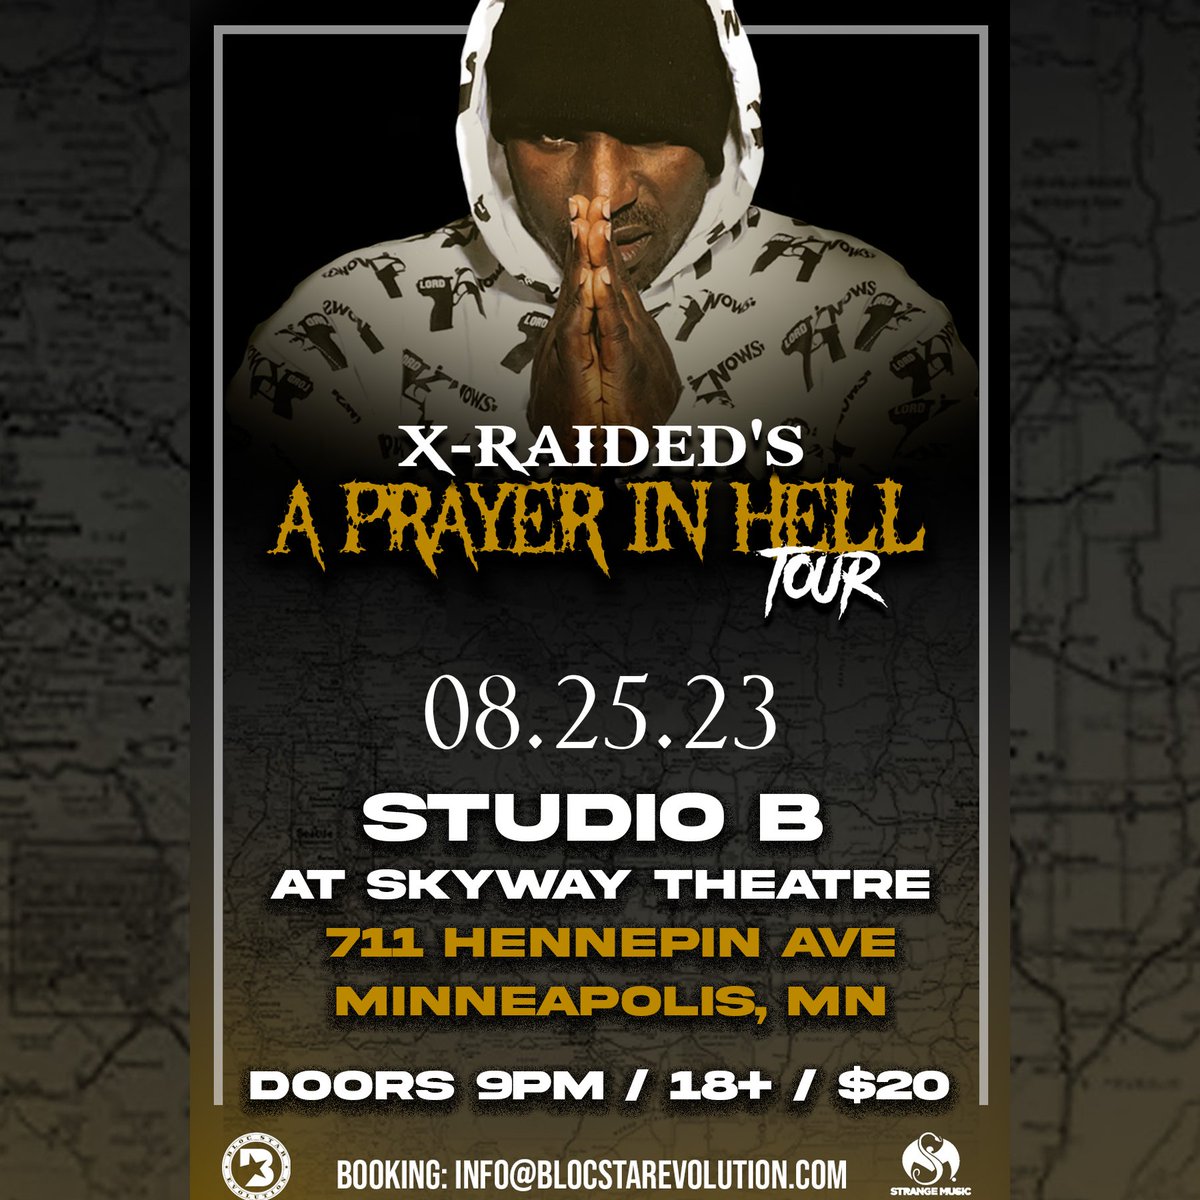 🙏ANNOUNCEMENT🙏 🌞 @OfficialXRaided is coming to Studio B this August to let us Feel The Roar! Get ready for the Prayer in Hell Tour! We are ecstatic for this one!